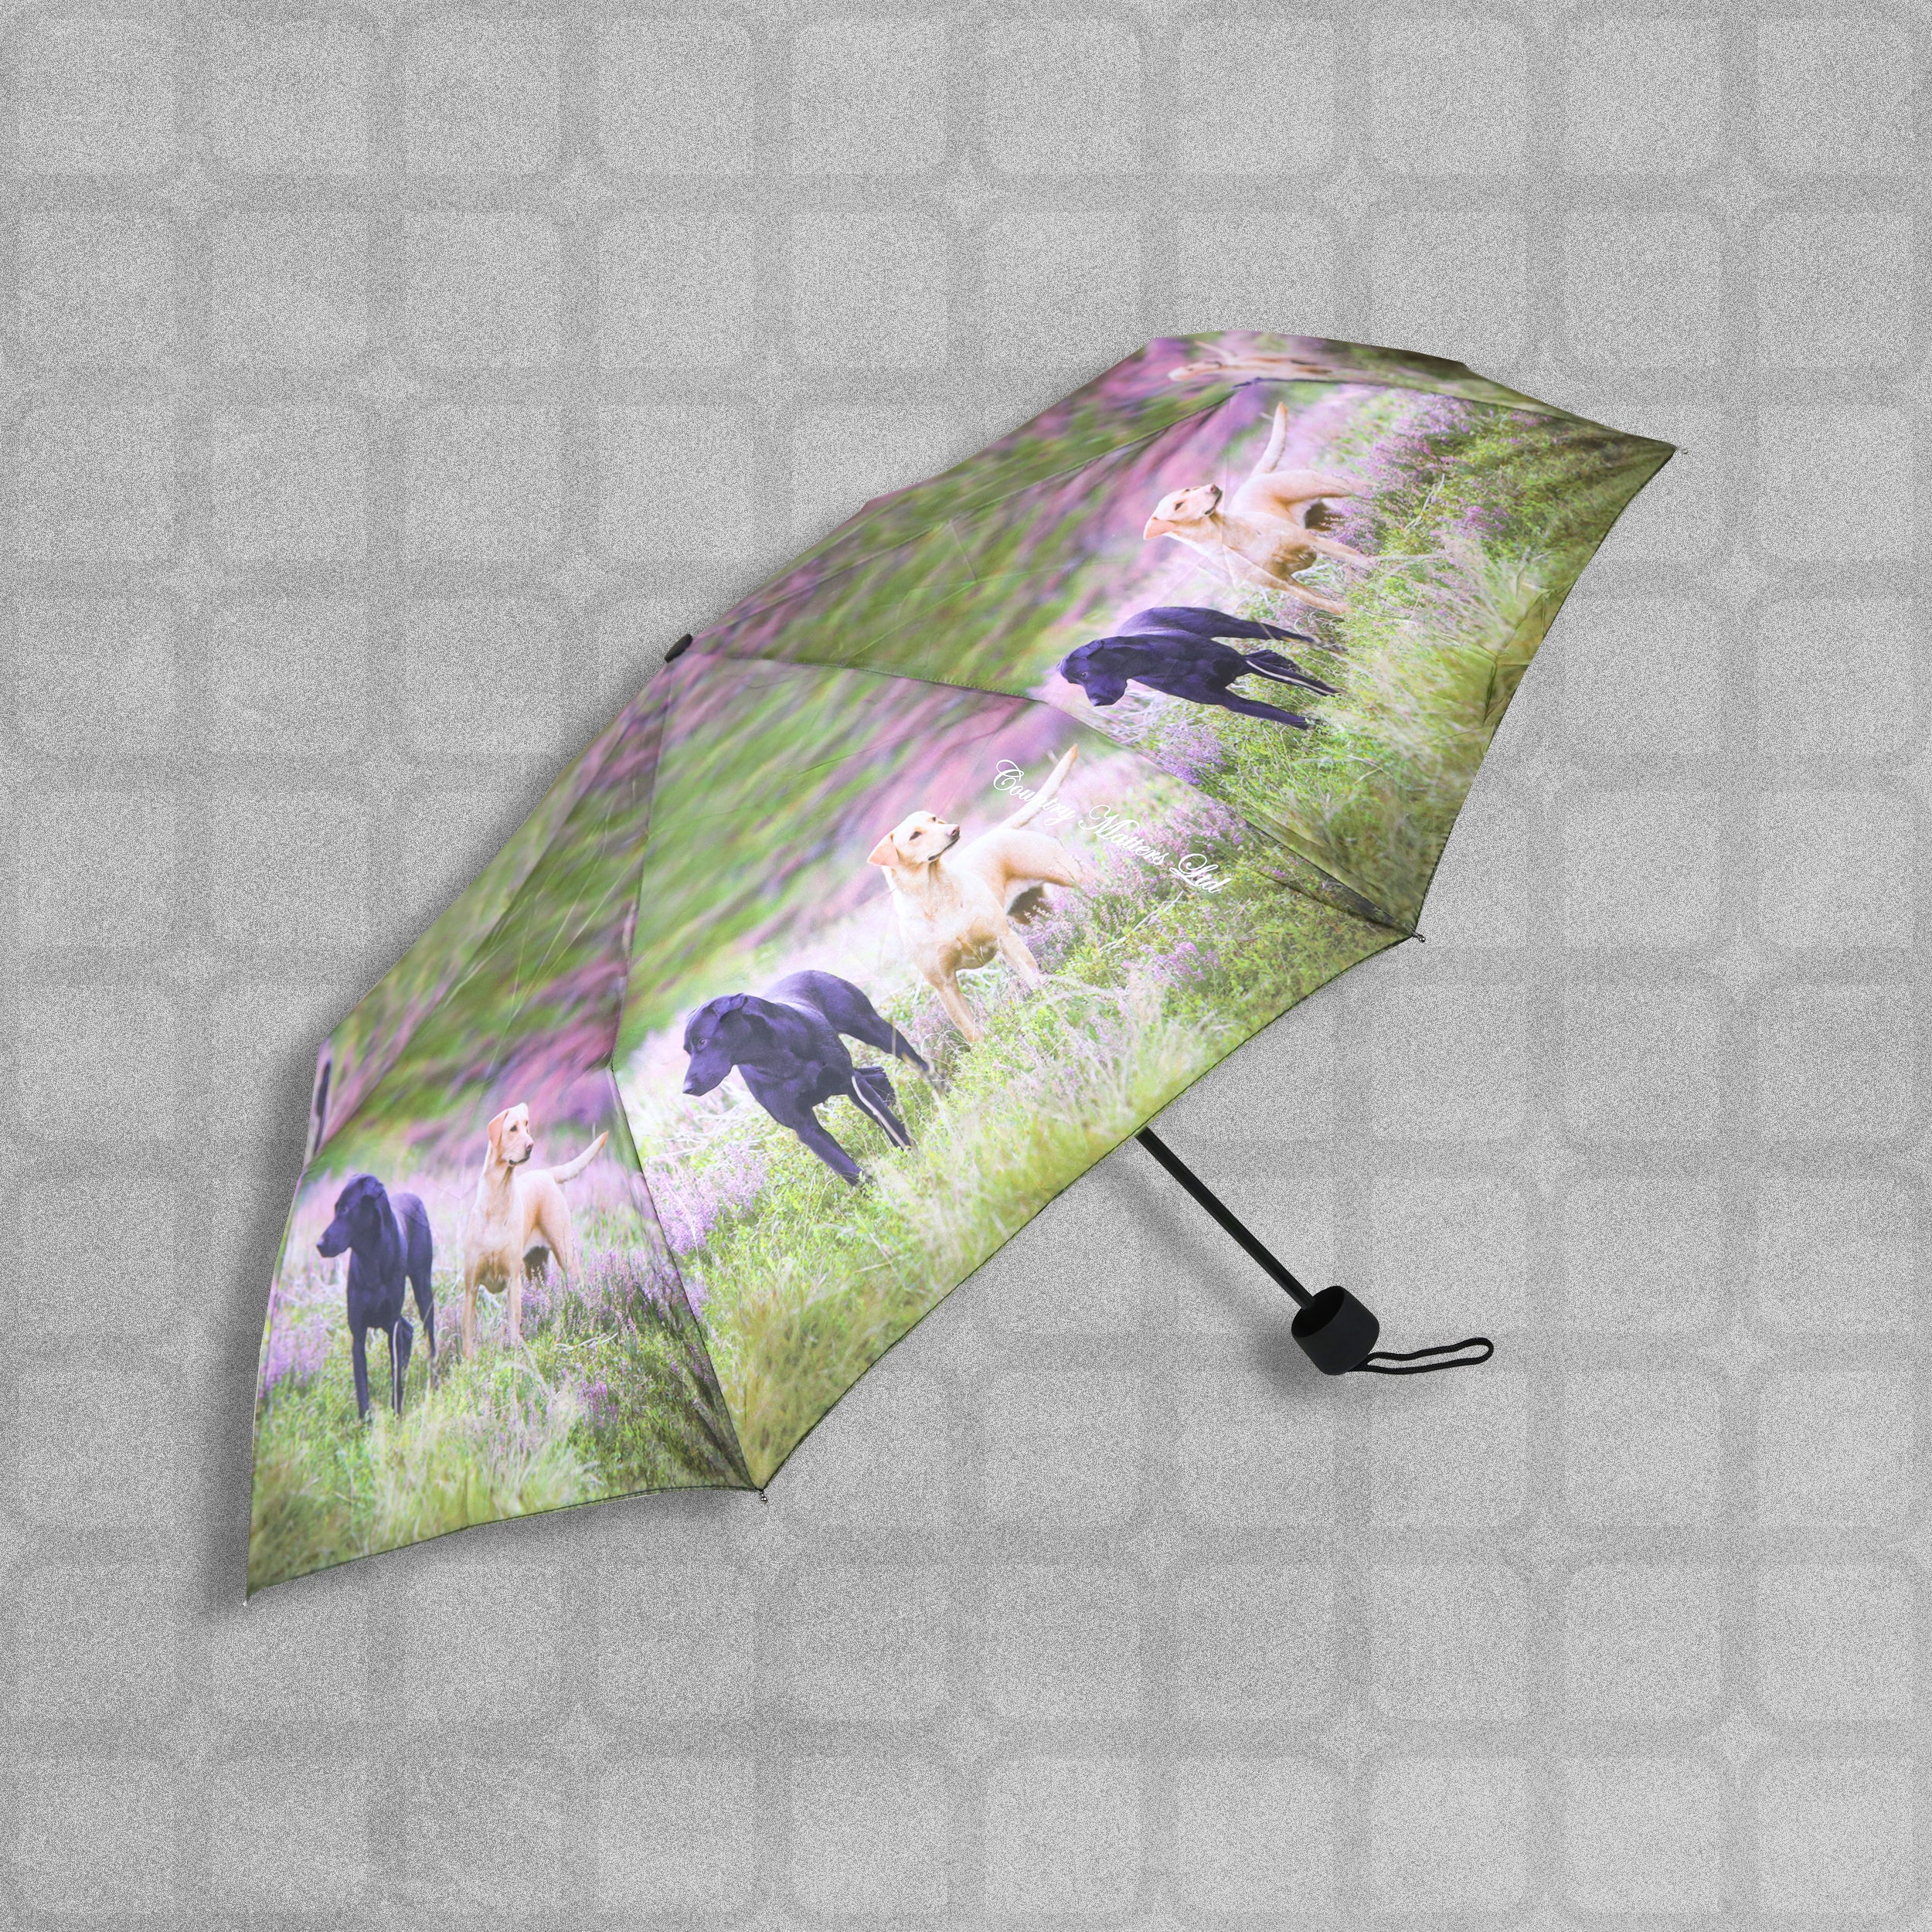 Country Matters Telescopic and Folding Umbrella - 'Two Labradors'